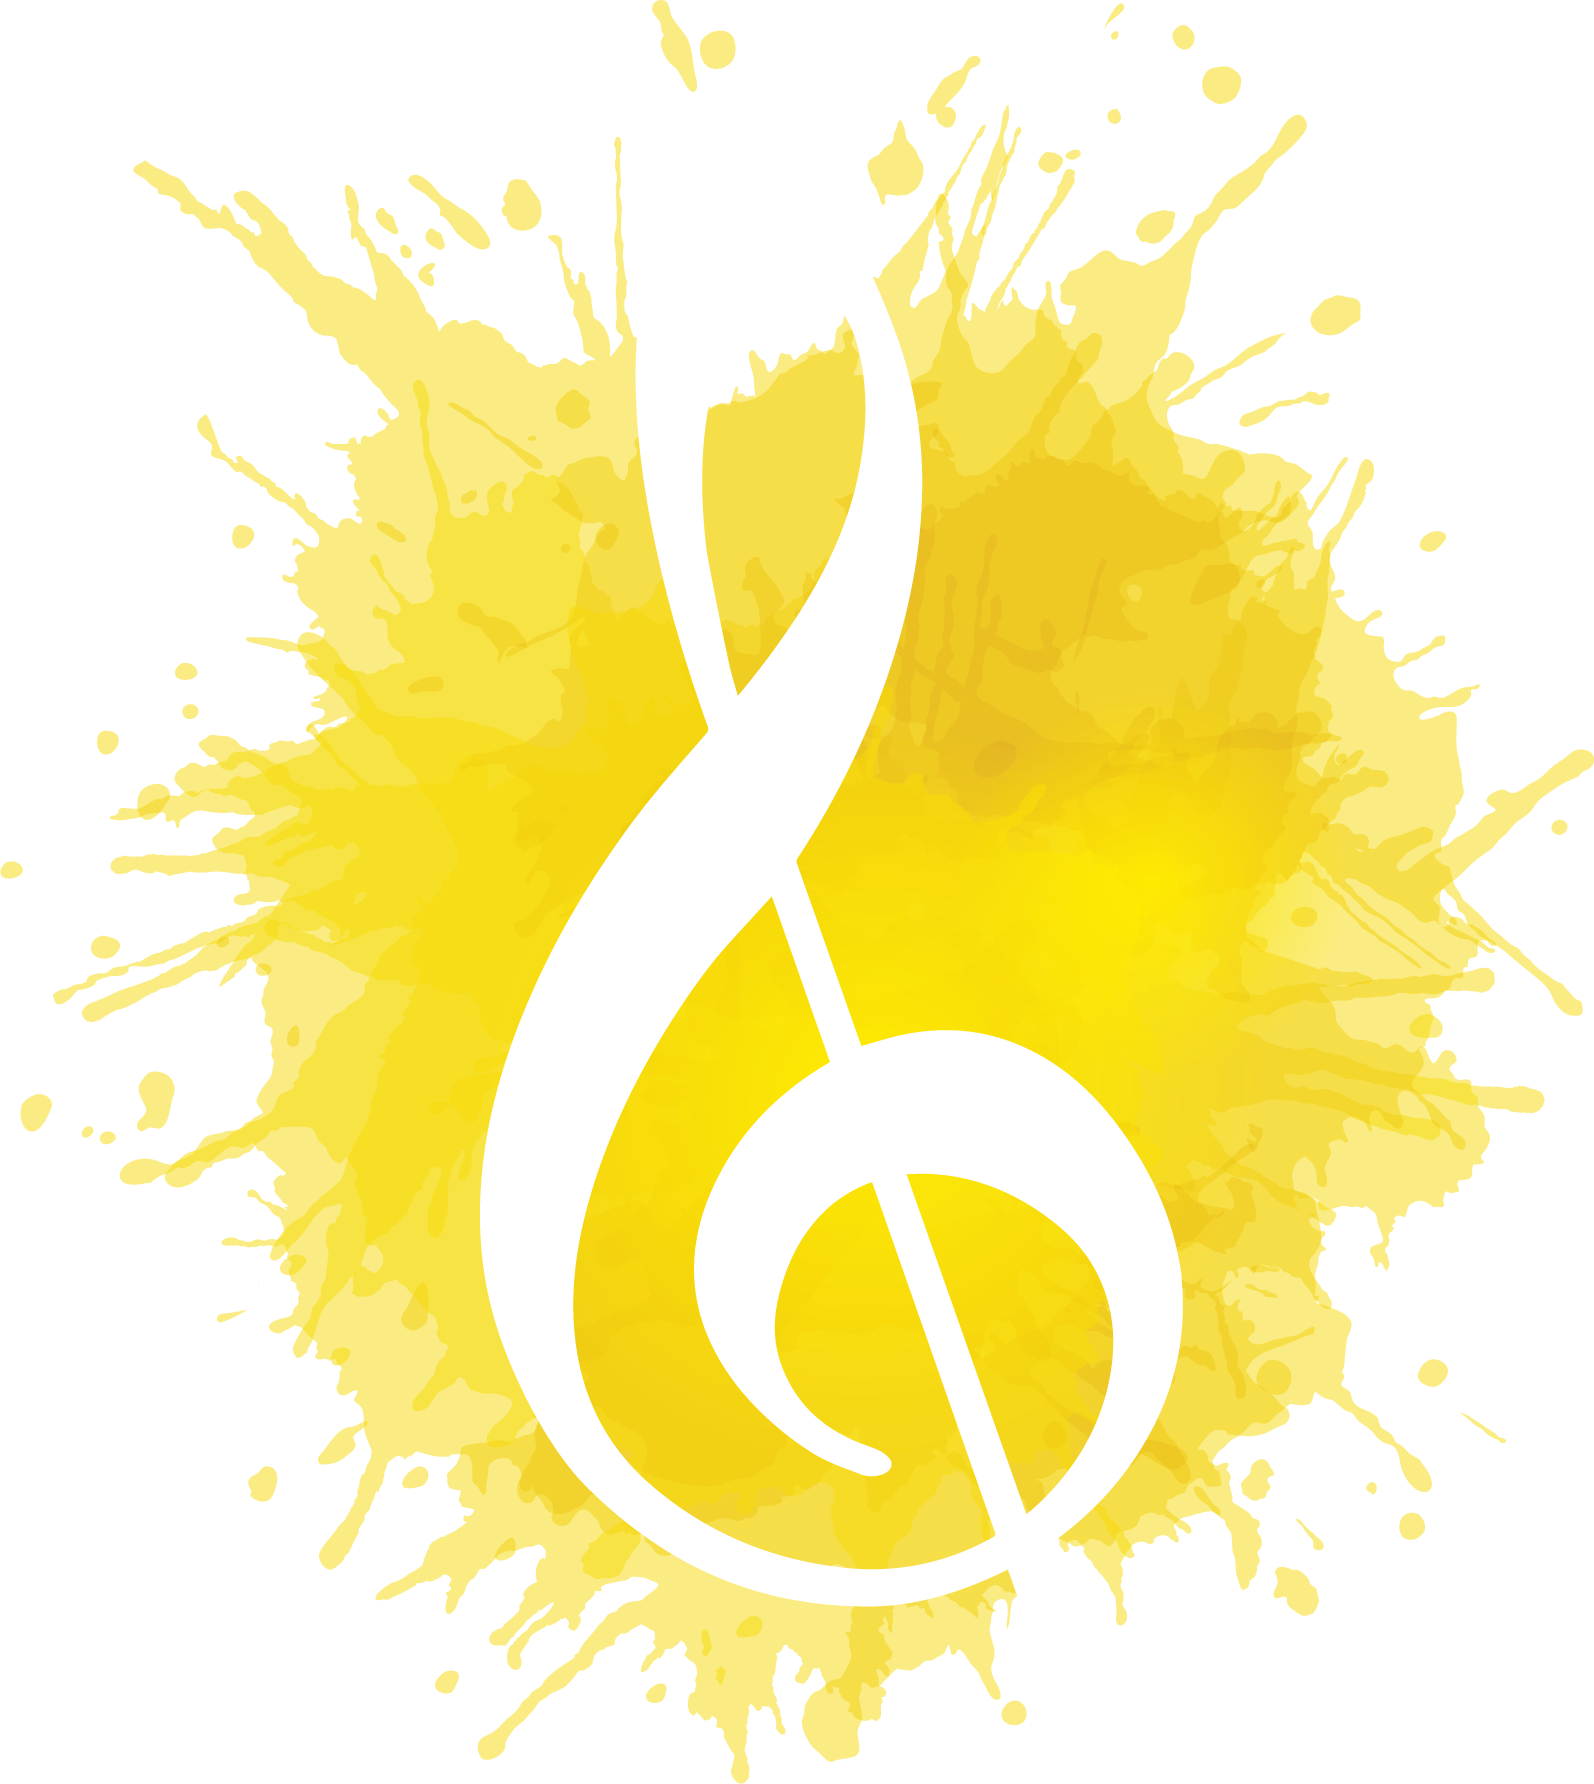 Abstract Musical Note Splash PNG